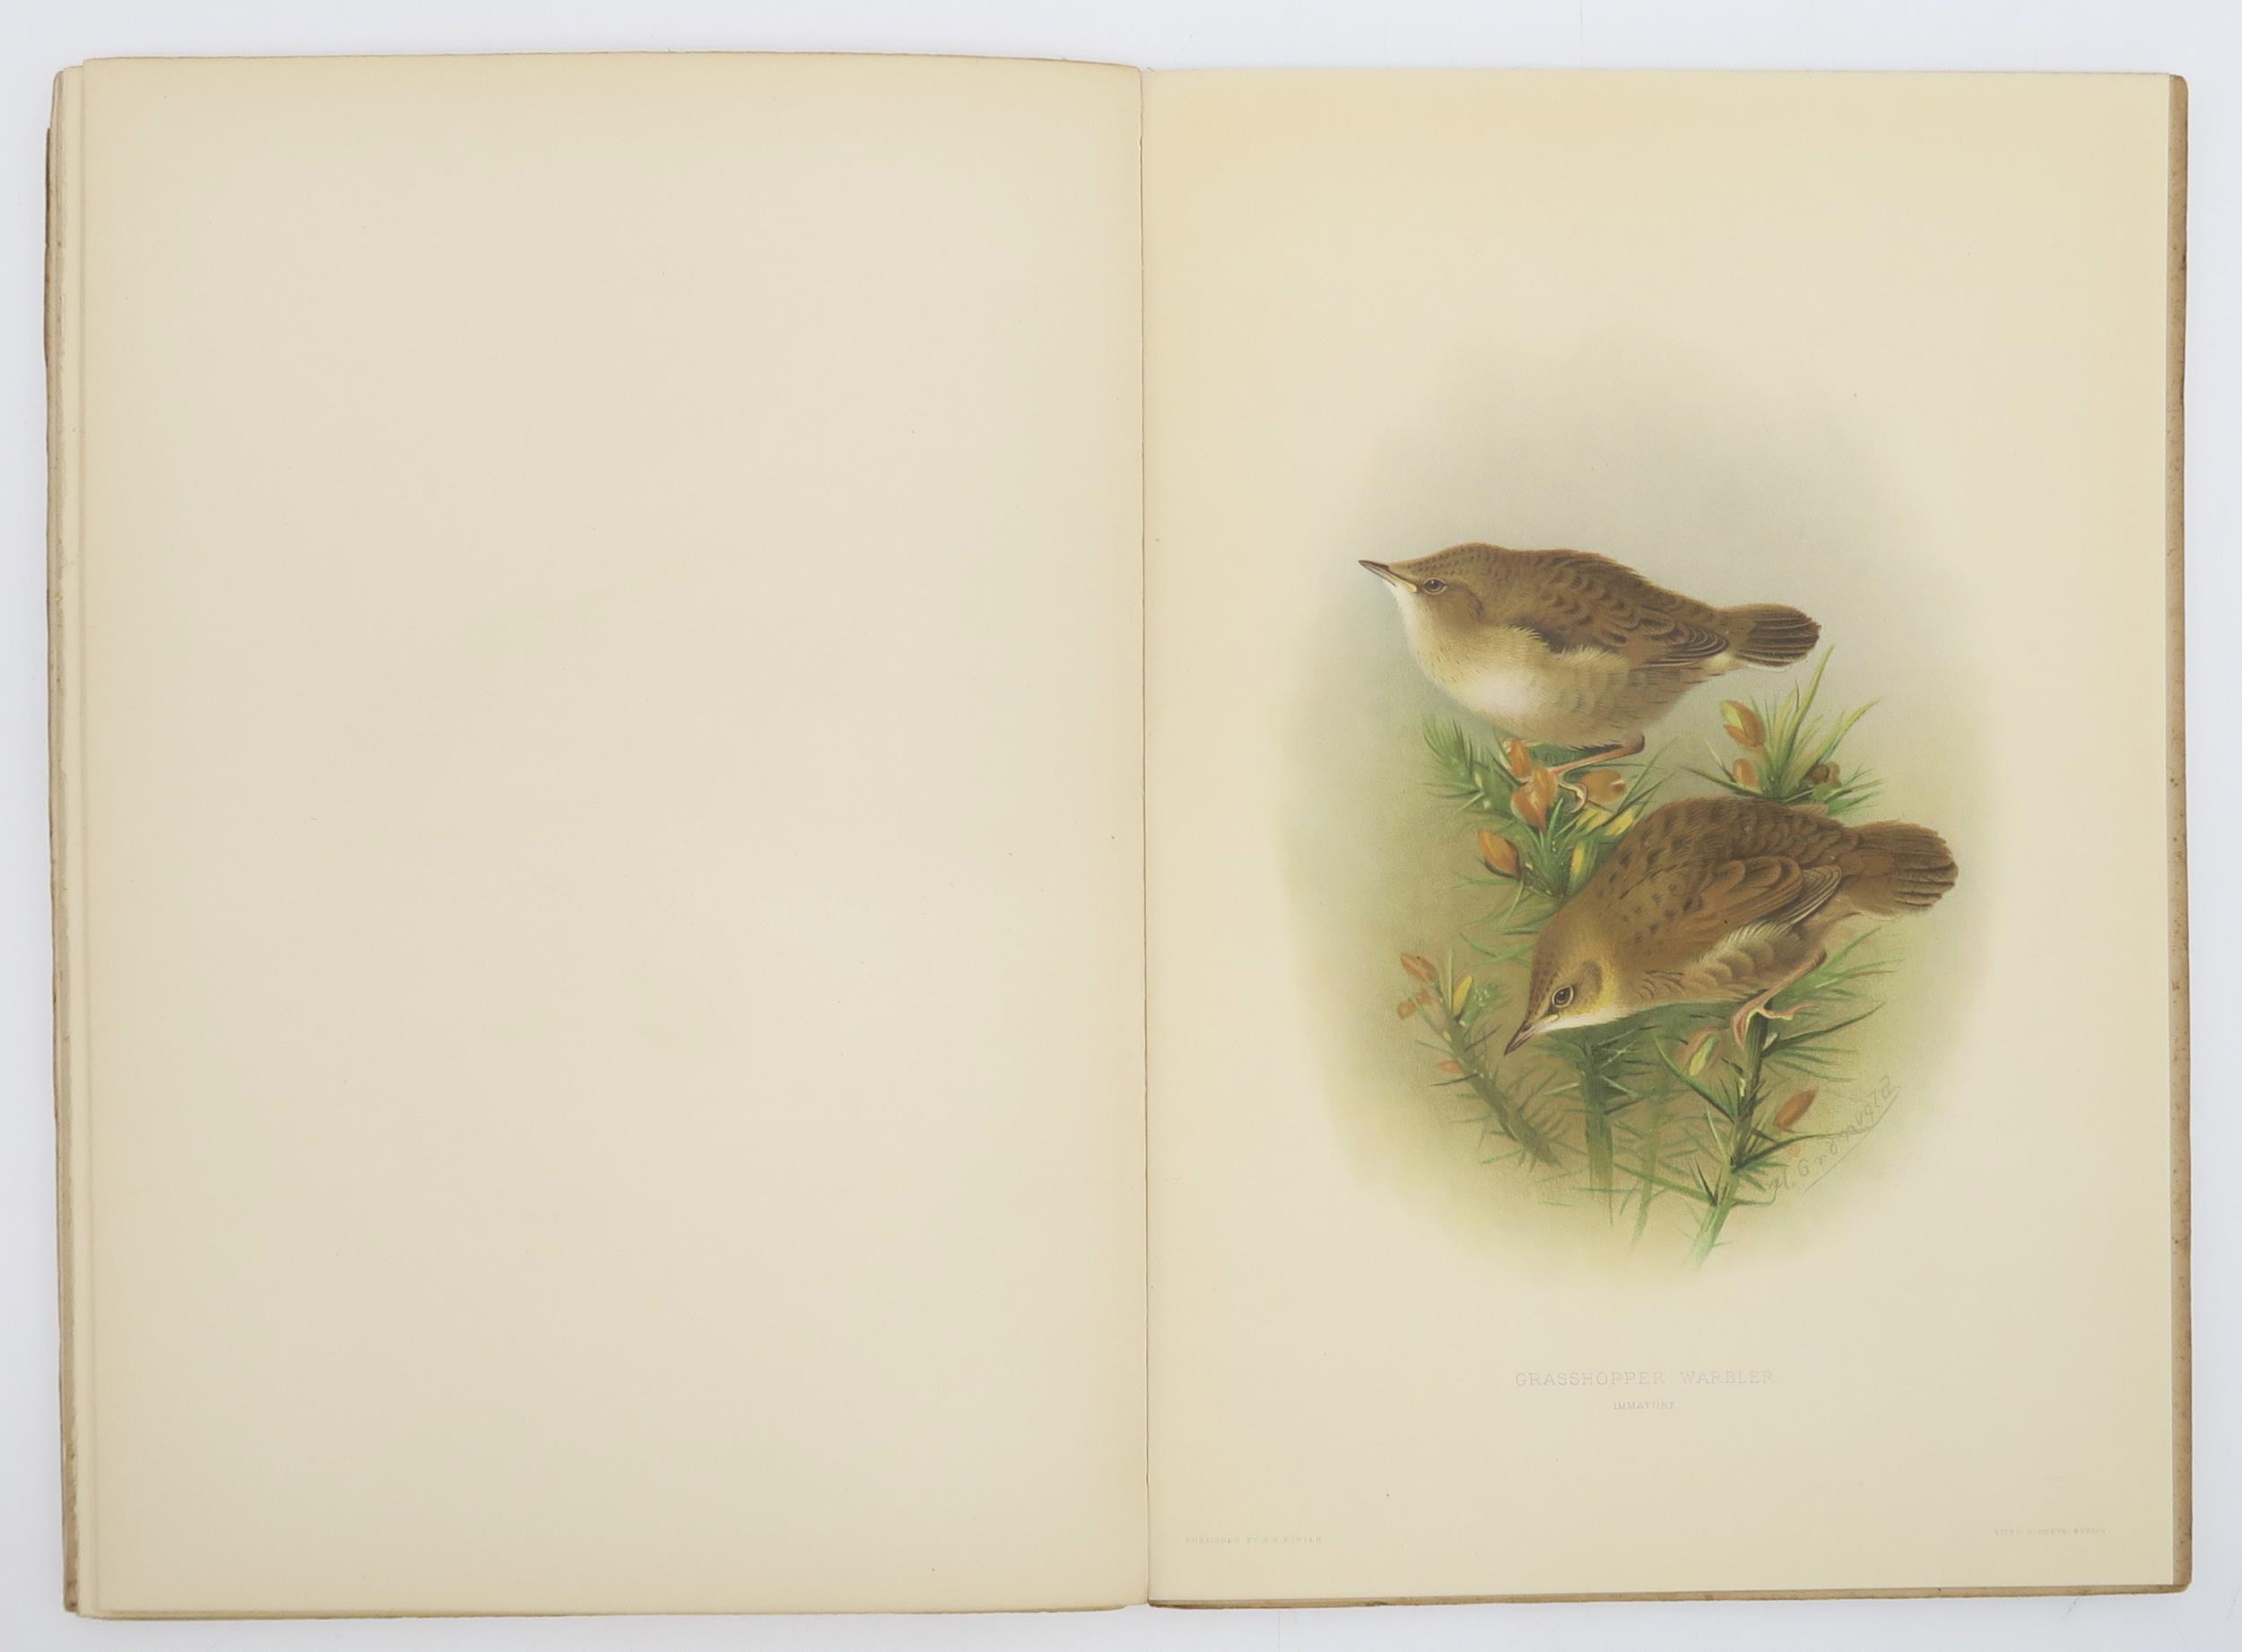 ORNITHOLOGY Howard, H. Eliot; Gronvold, Henrik (illus.) The British Warbler: a History with Problems - Image 4 of 4